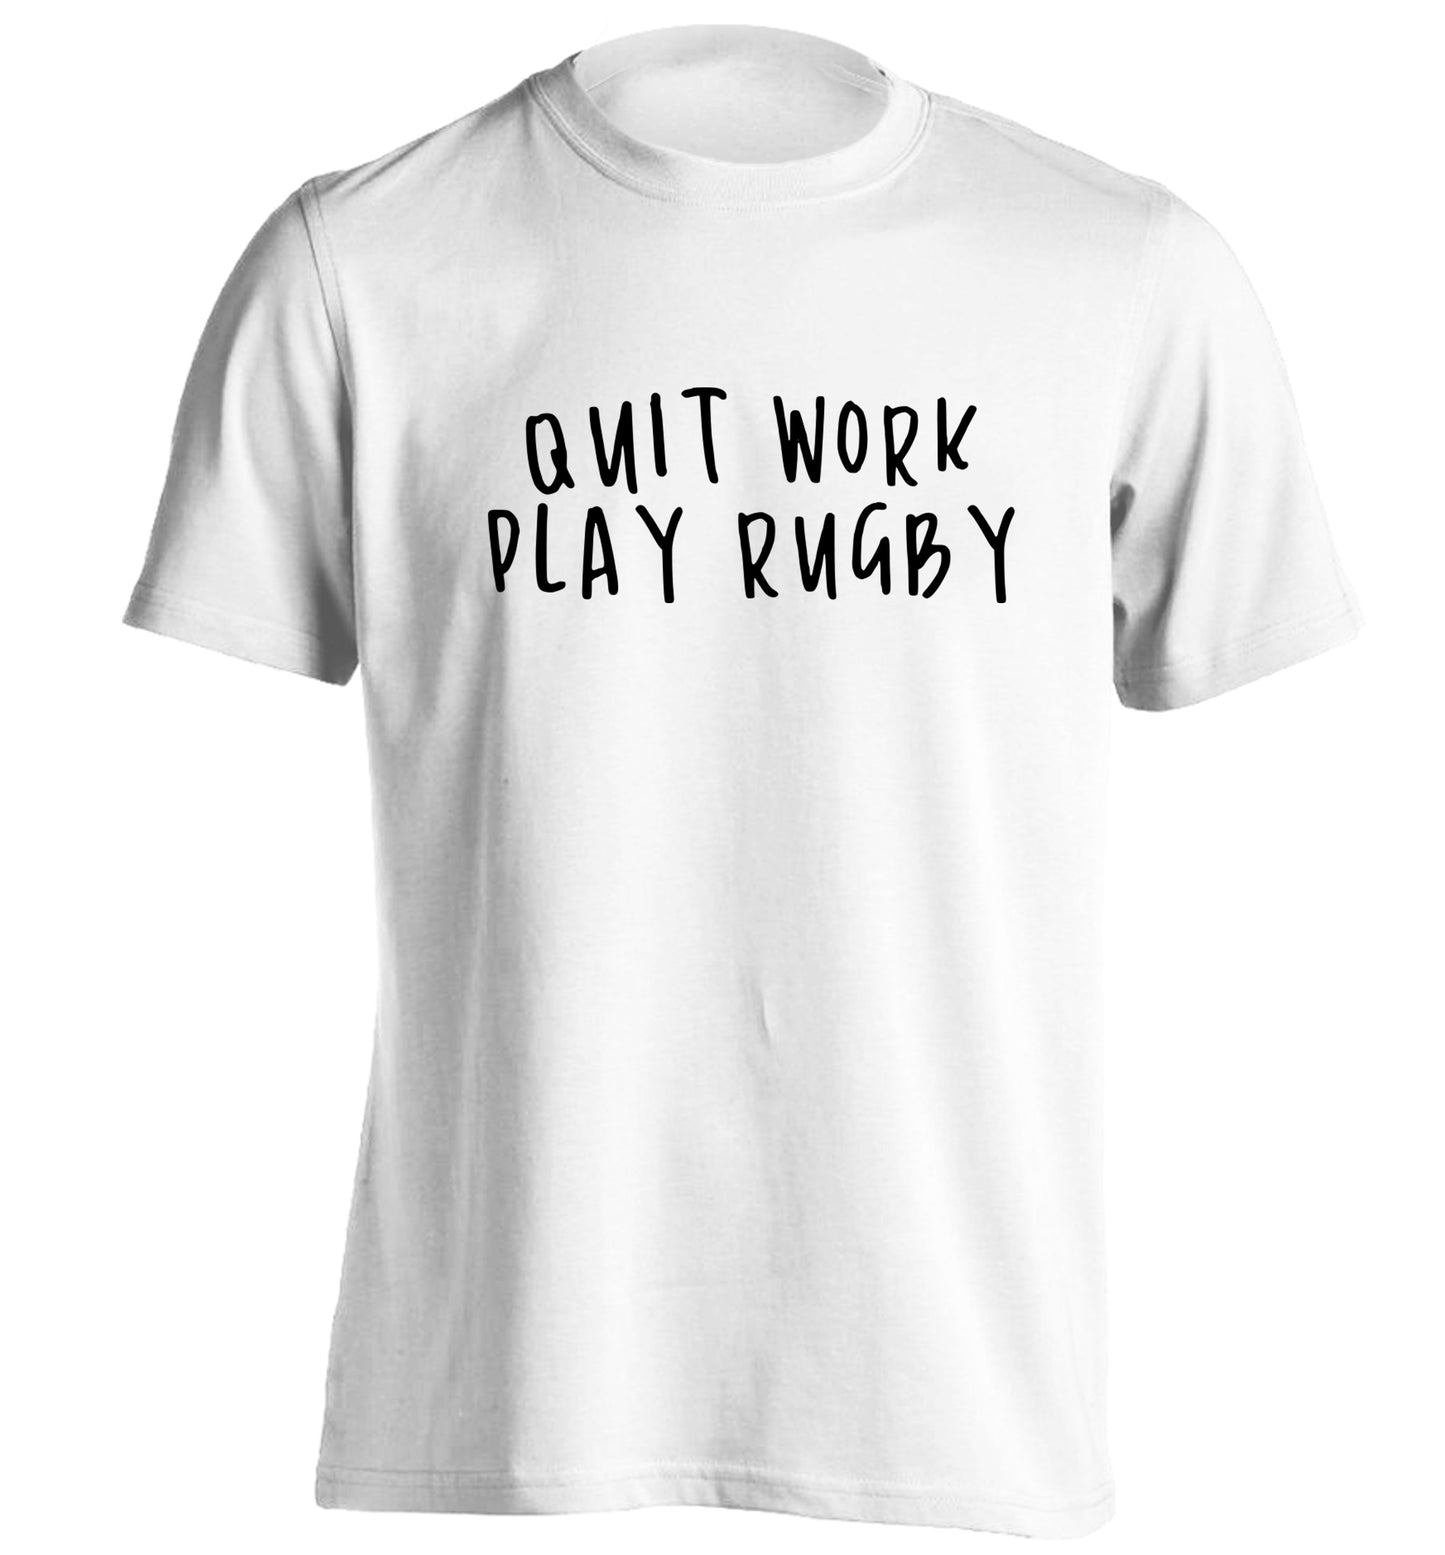 Quit work play rugby adults unisex white Tshirt 2XL